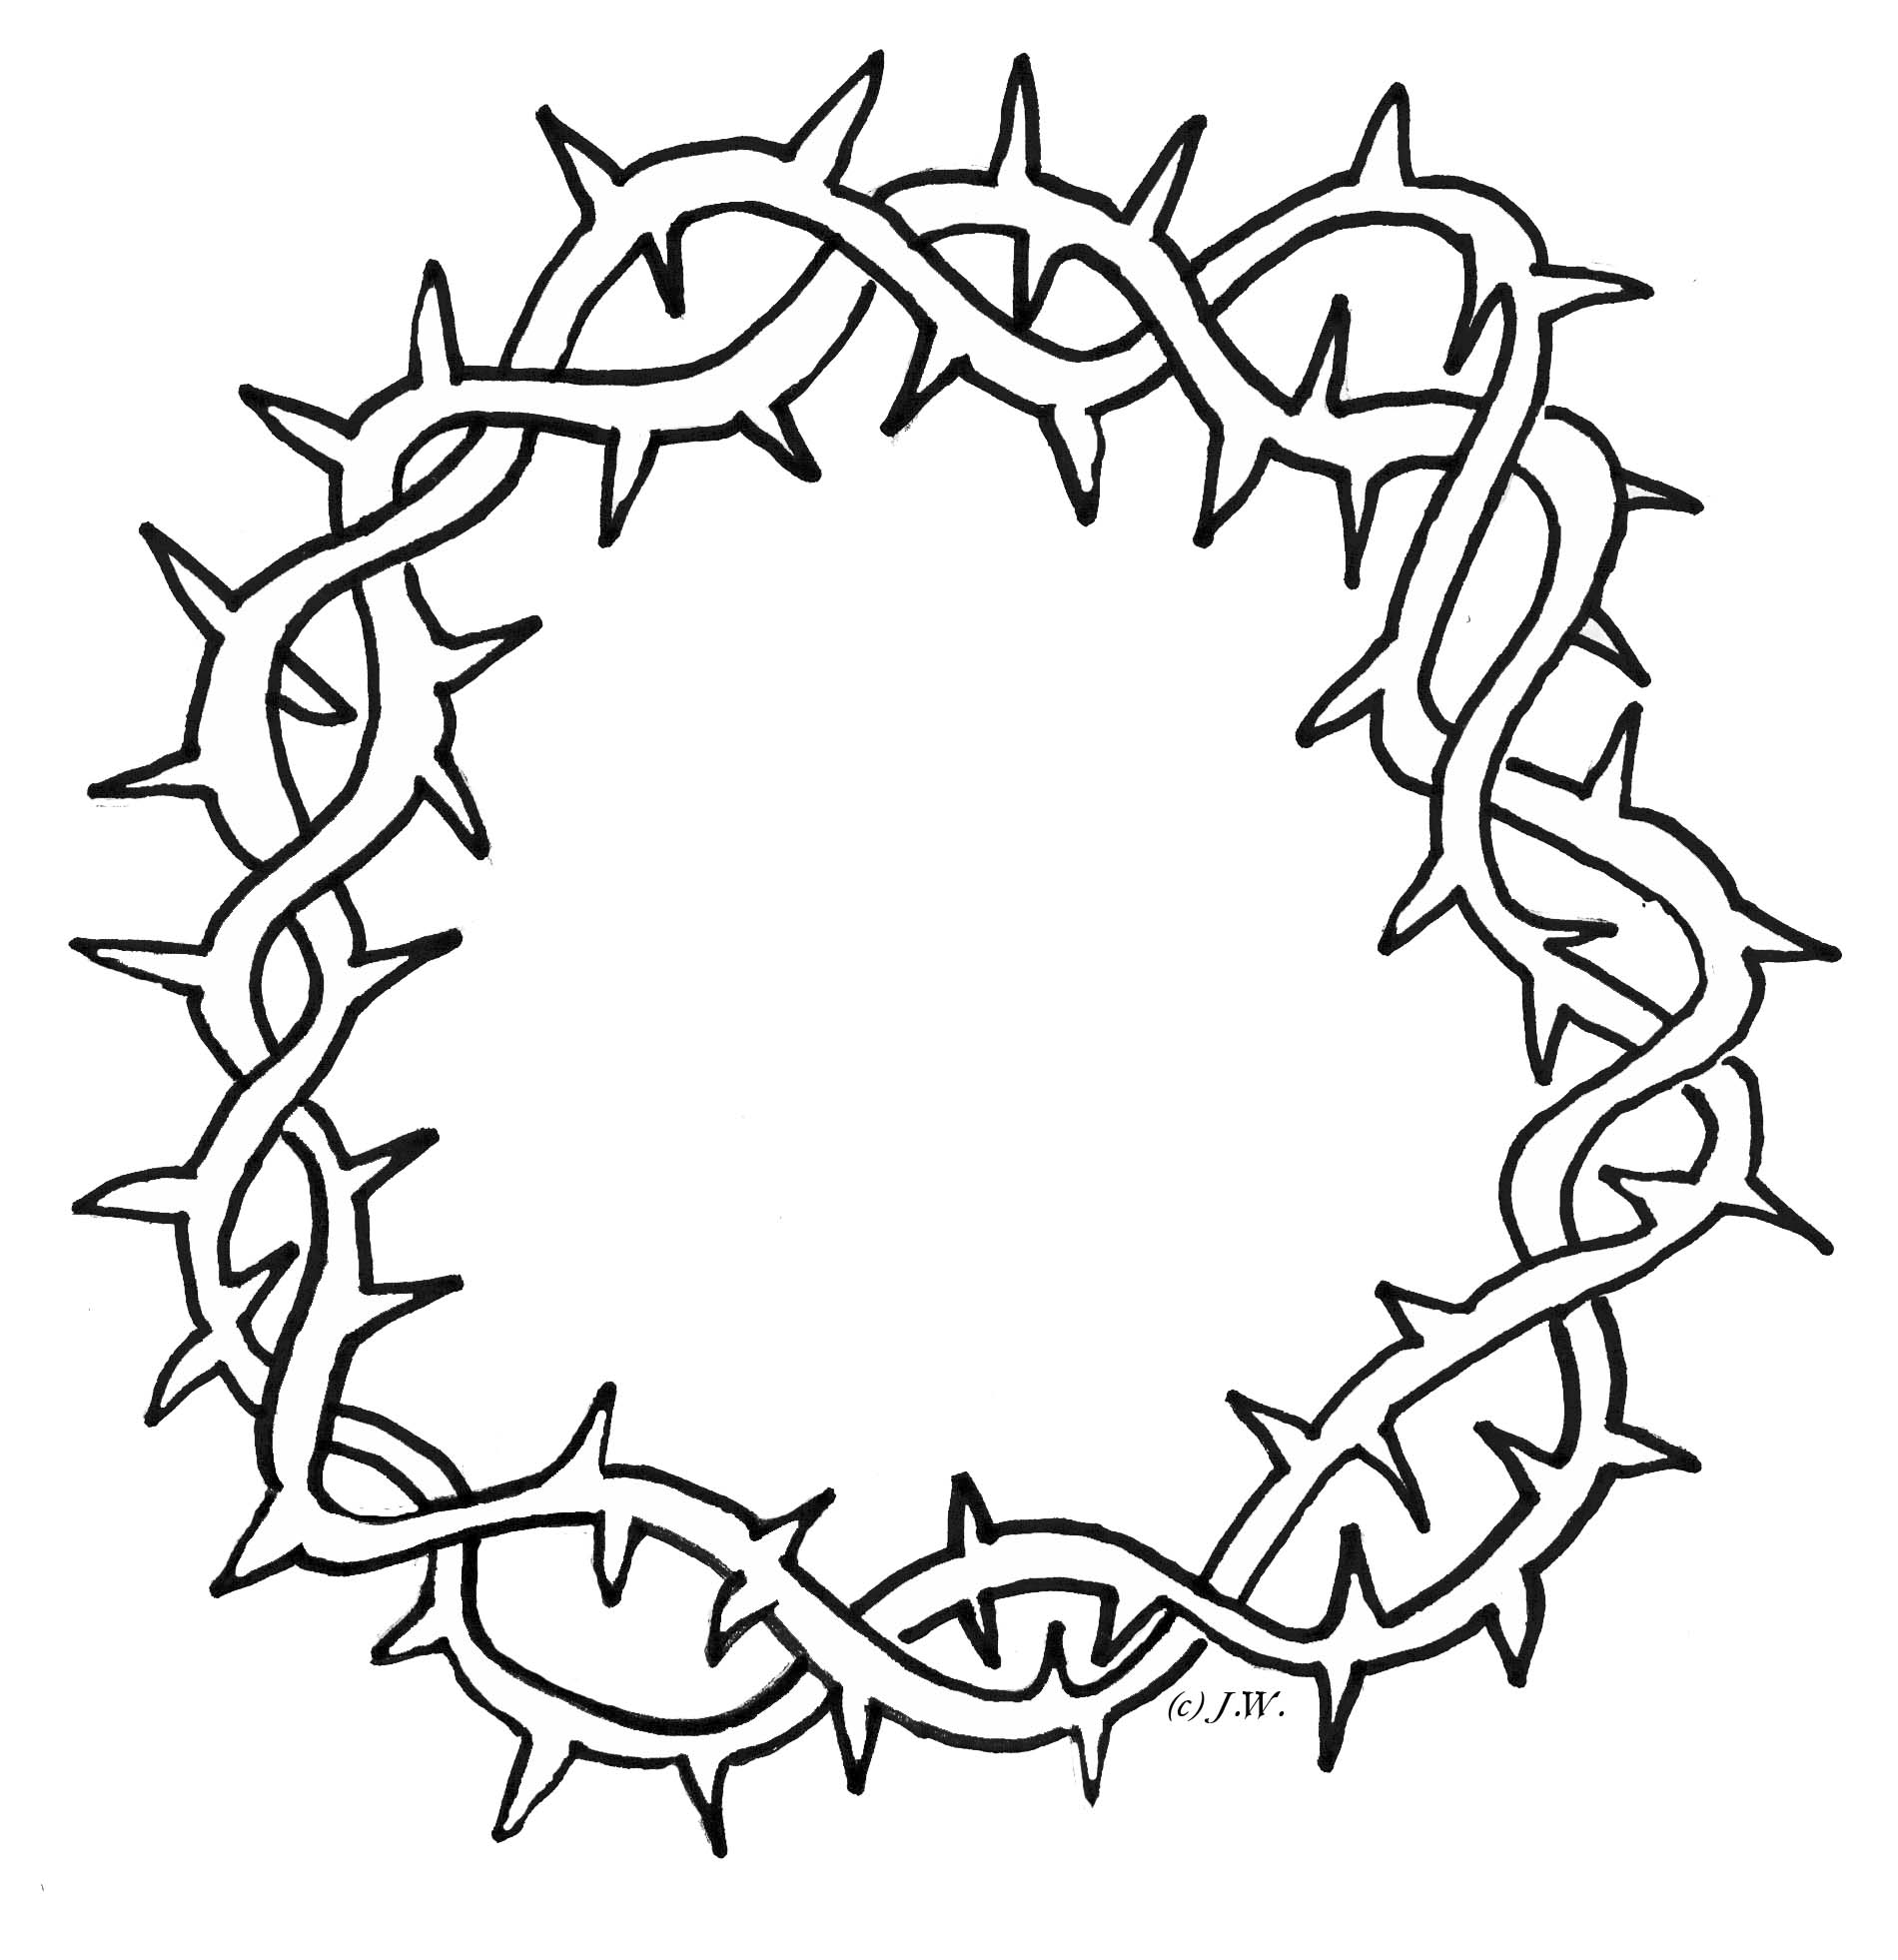 free clip art crown of thorns - photo #15